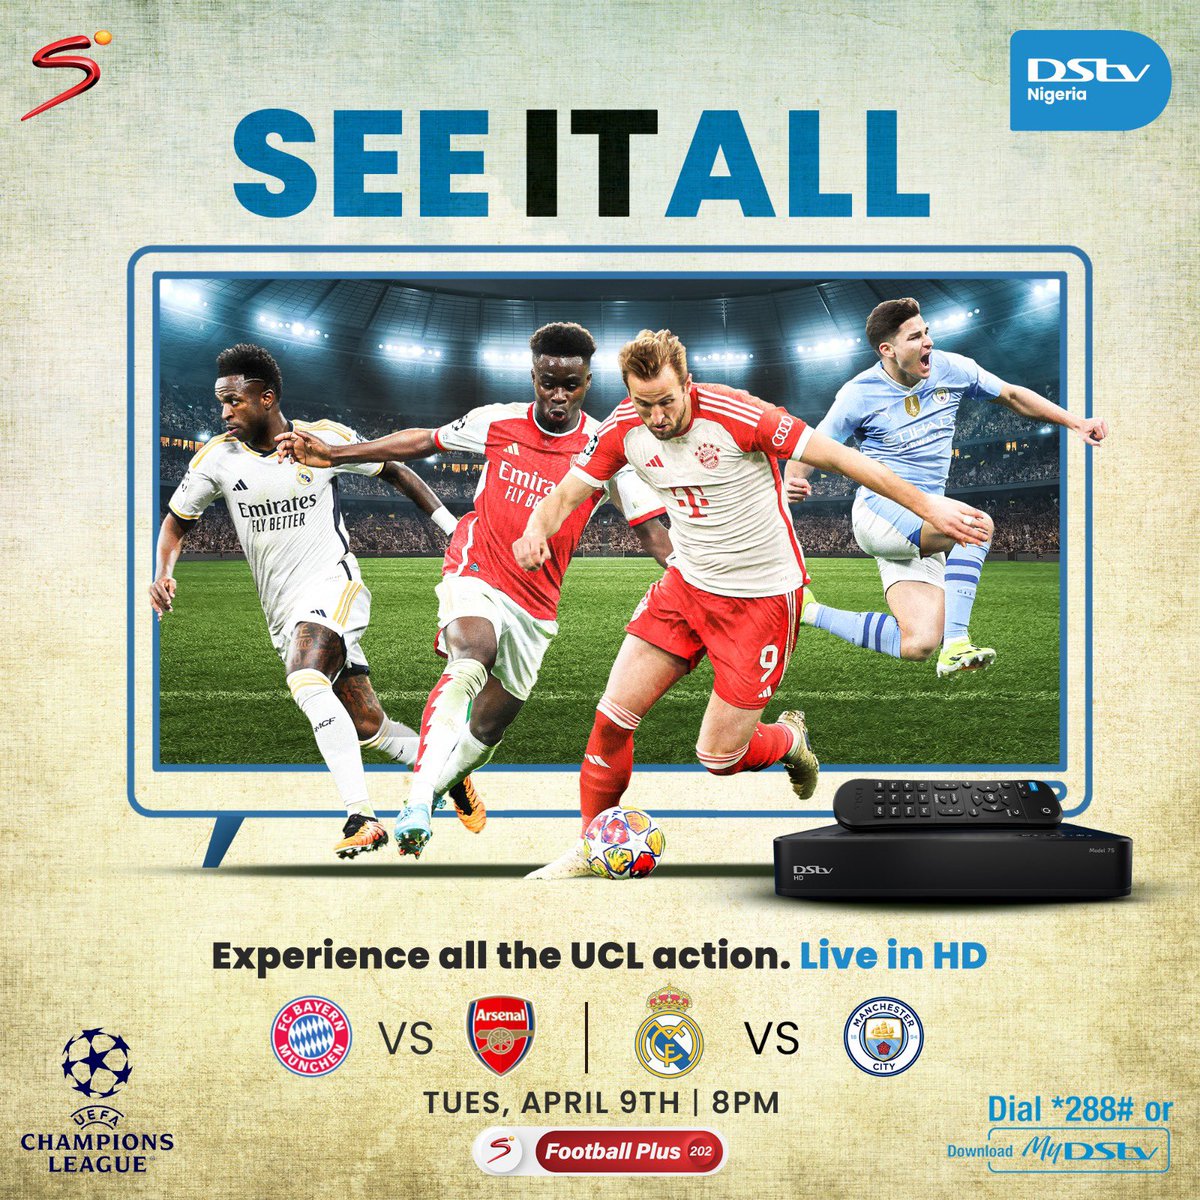 Champions League glory awaits! Witness every heart-stopping tackle, breathtaking goal, and legendary performance. Catch all the action, live and exclusive on DStv! Click link below to reconnect. mydstv.onelink.me/vGln/UEFA